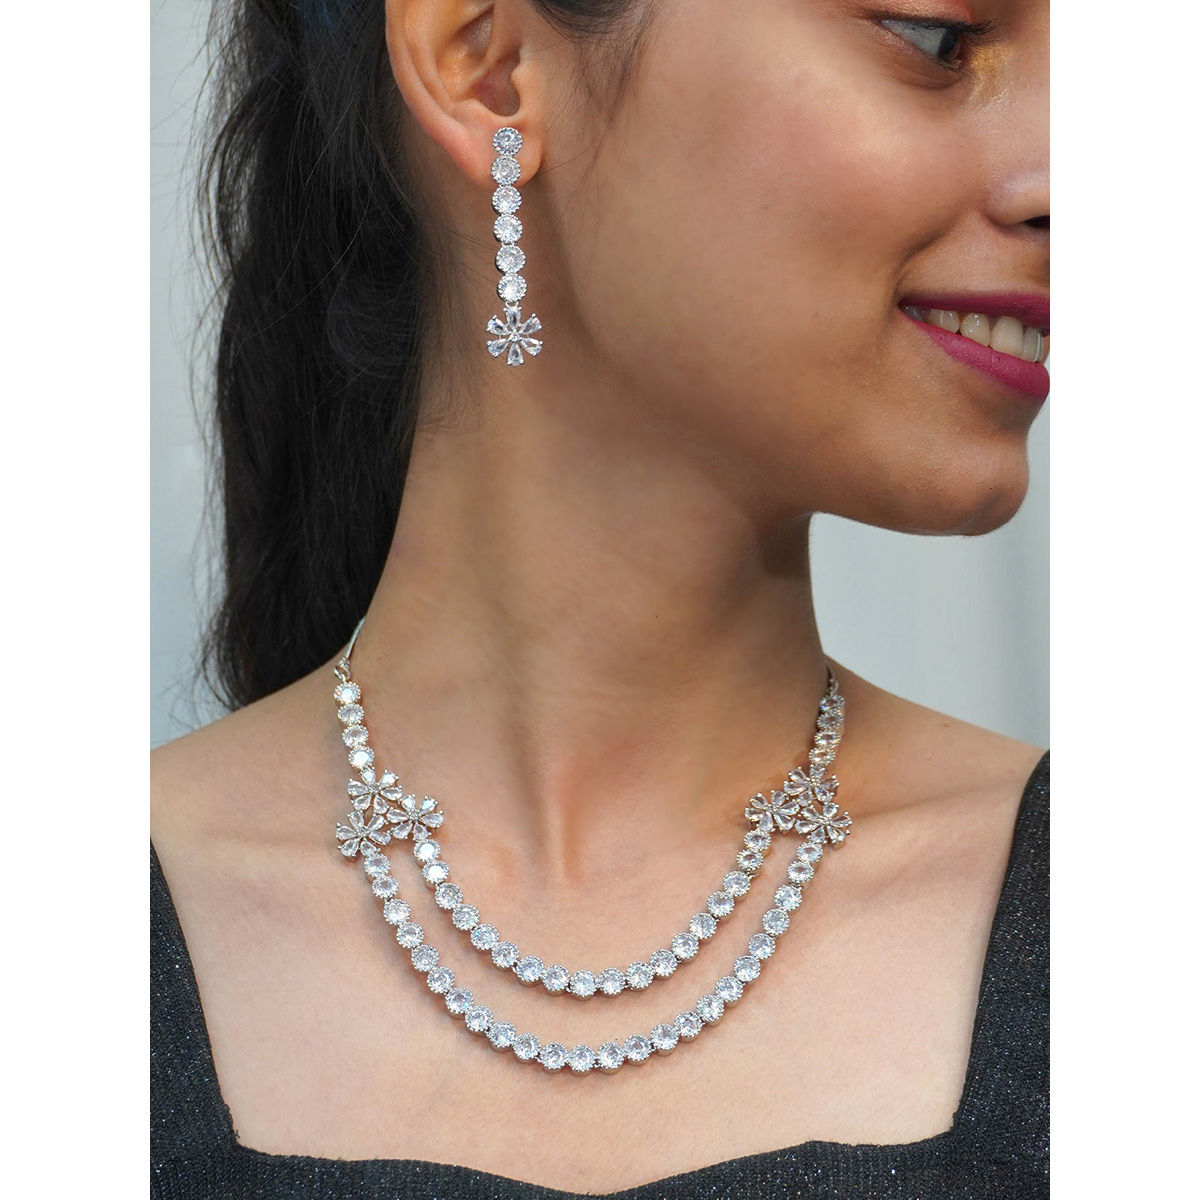 5-Layer Diamond and Stone Long Necklace Set with Matching Earrings –  sagunittujewel